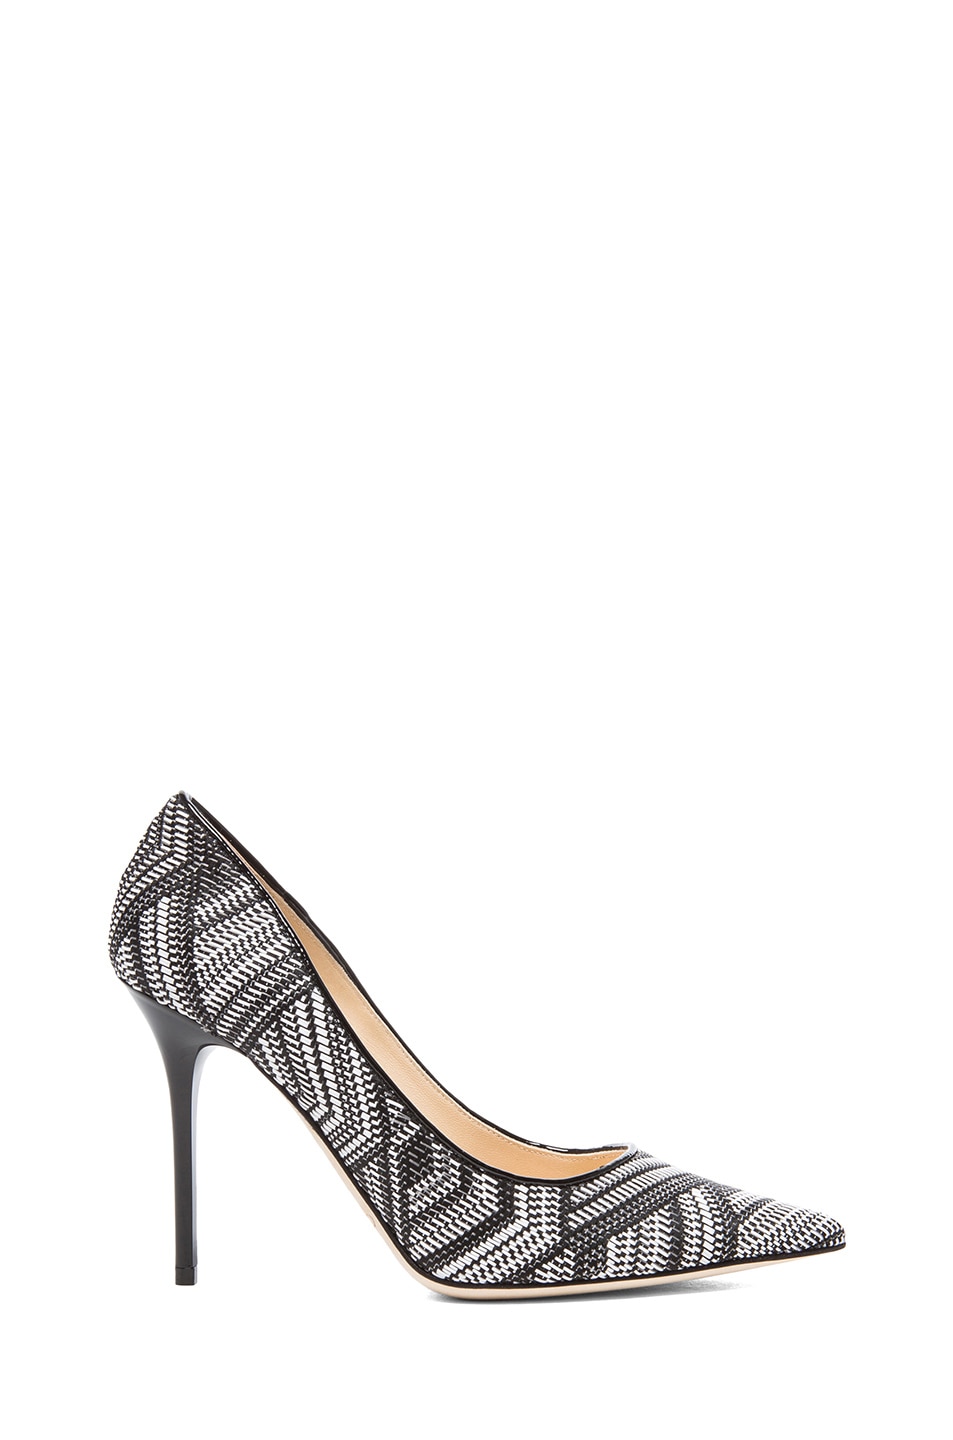 Jimmy Choo Abel Pointed Woven Fabric Pumps in Black & White | FWRD